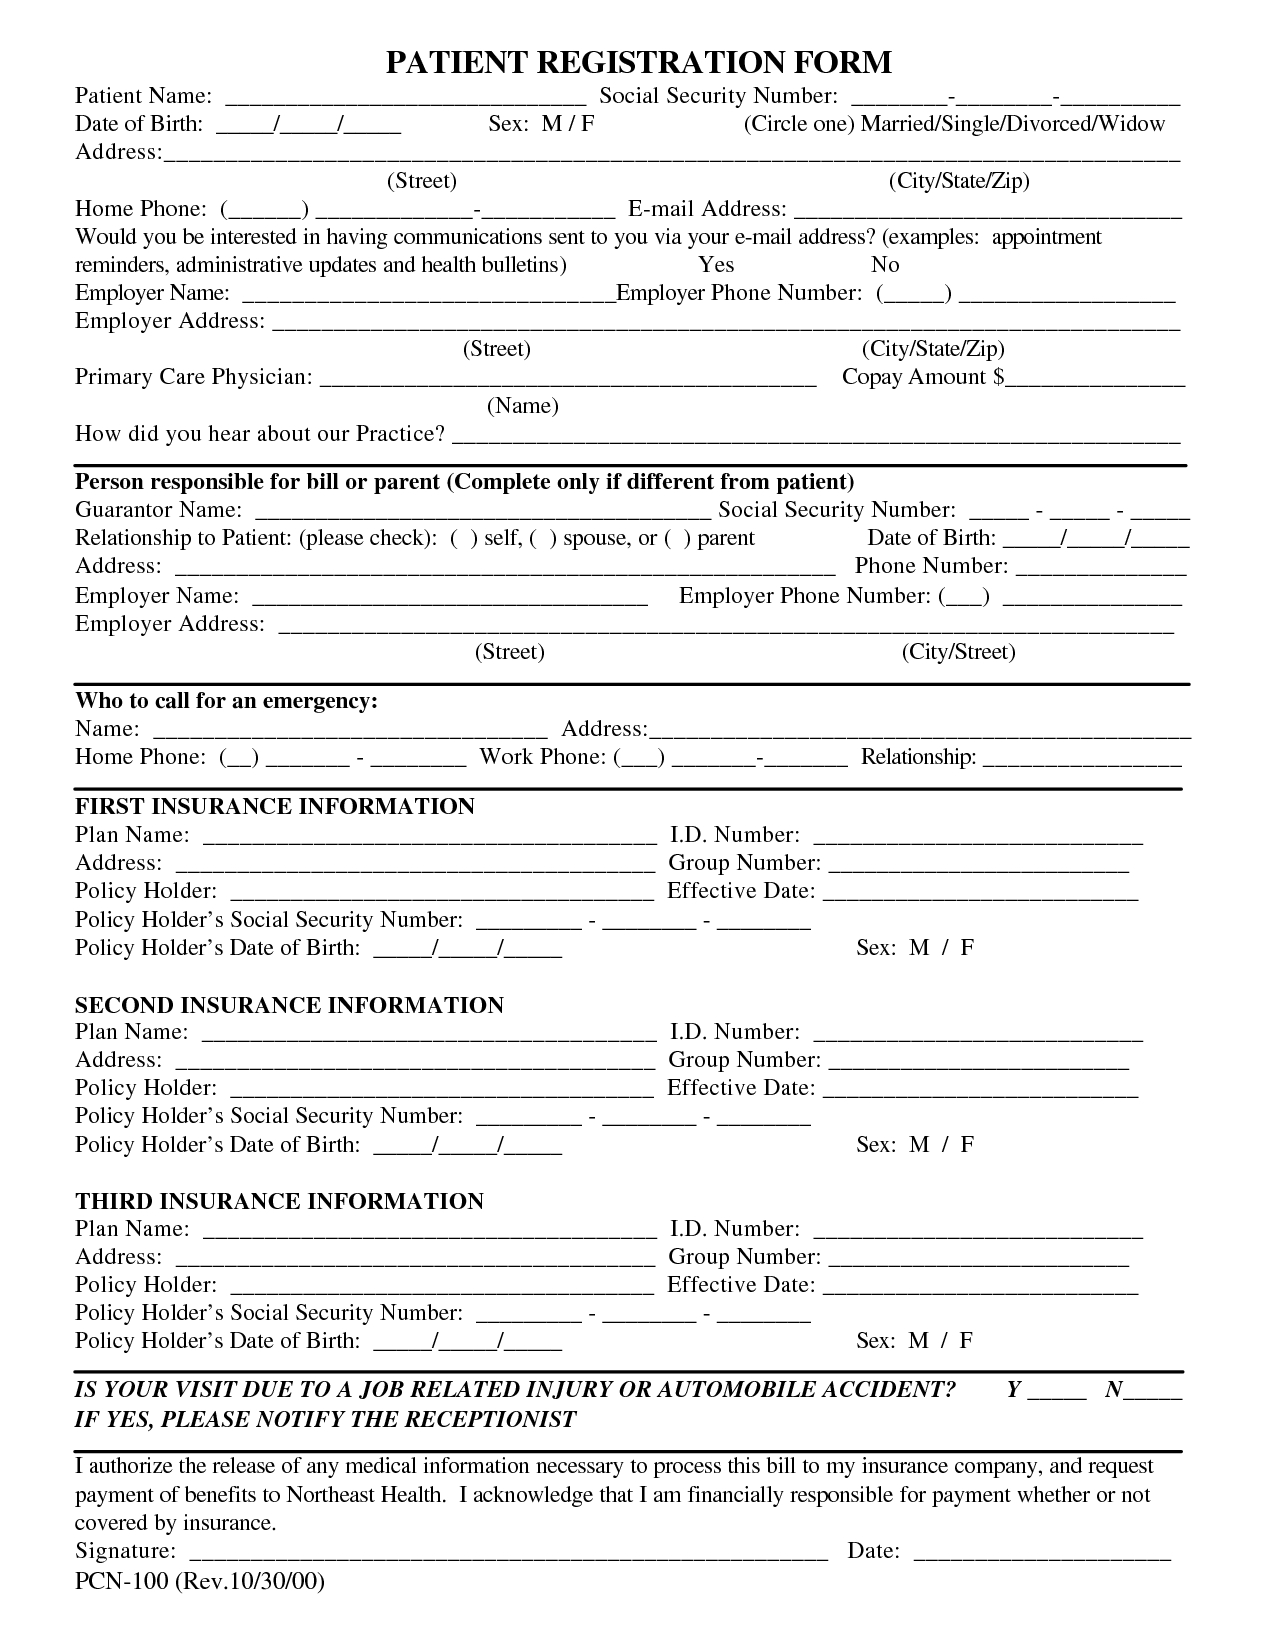 Free Patient Registration Form Template | Blank Medical For Medical History Template Word